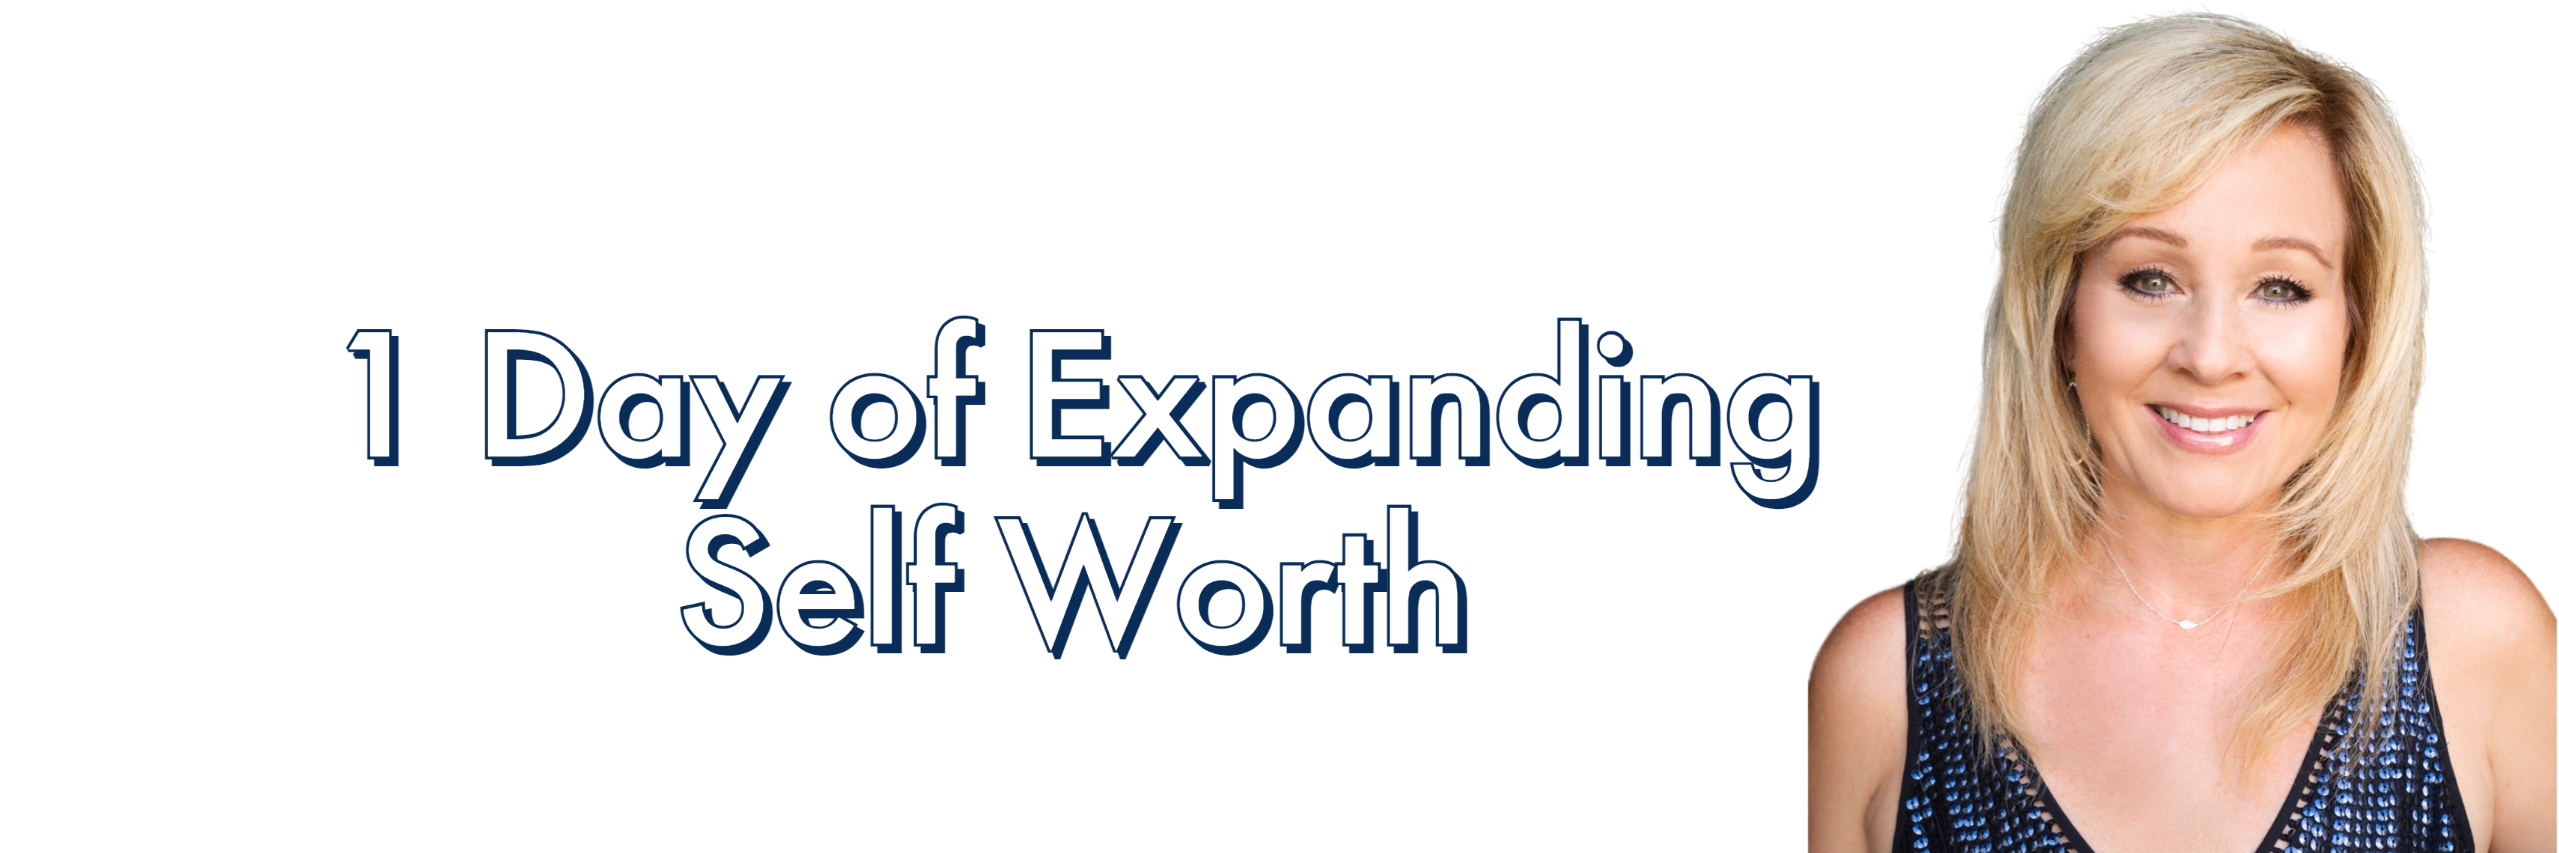 1 day of expanding self worth